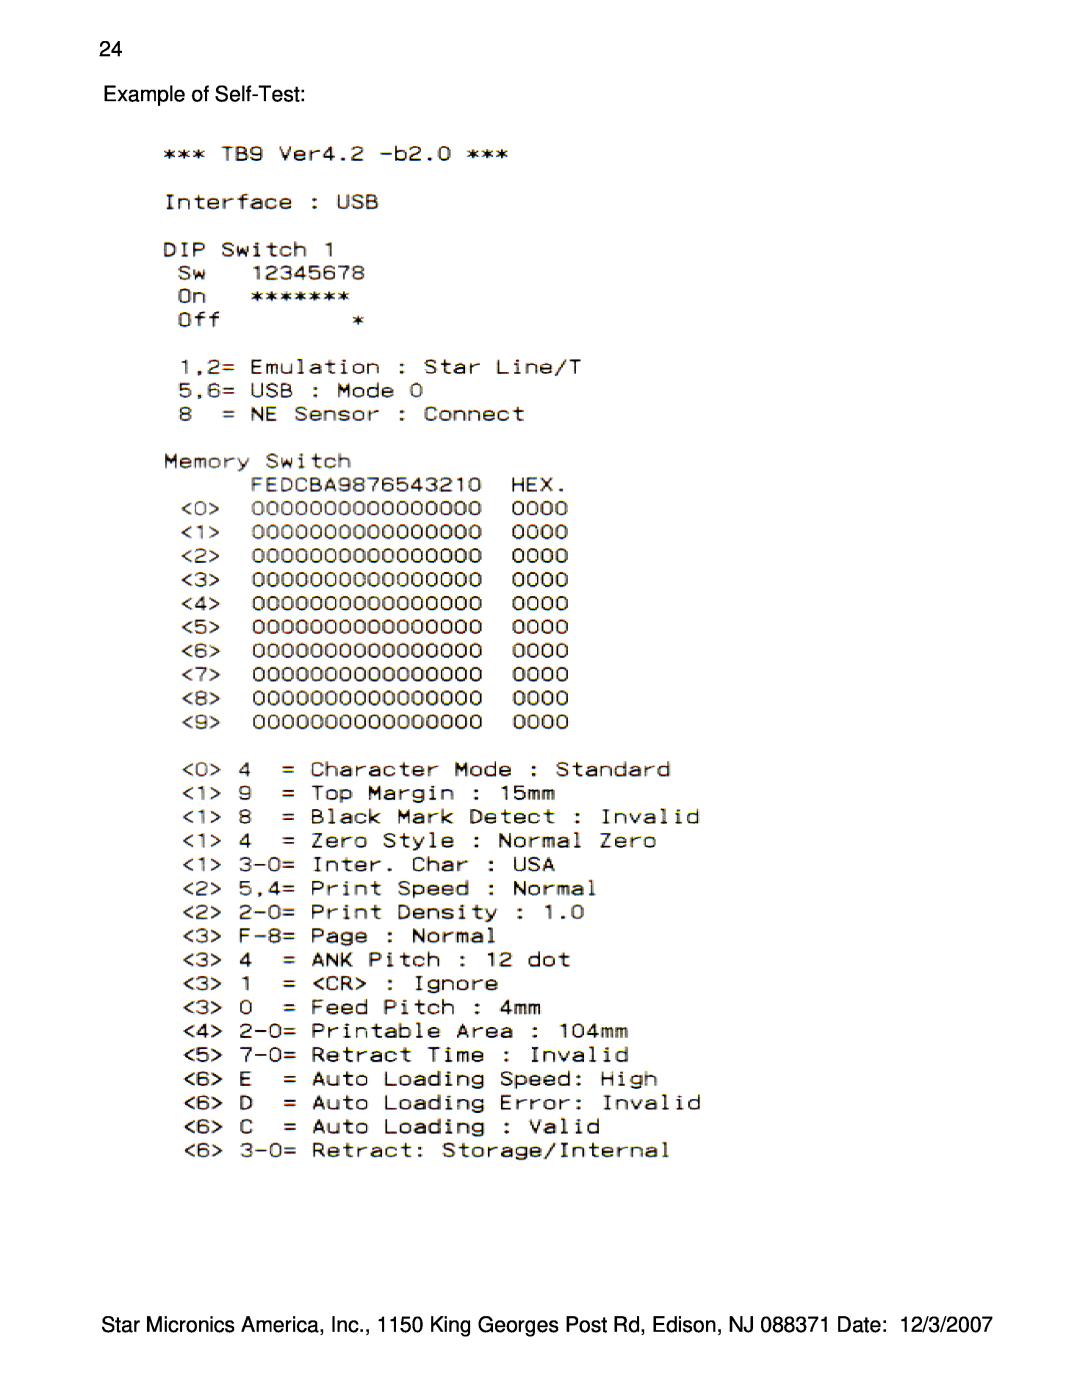 Star Micronics TUP942, TUP992 manual Example of Self-Test 